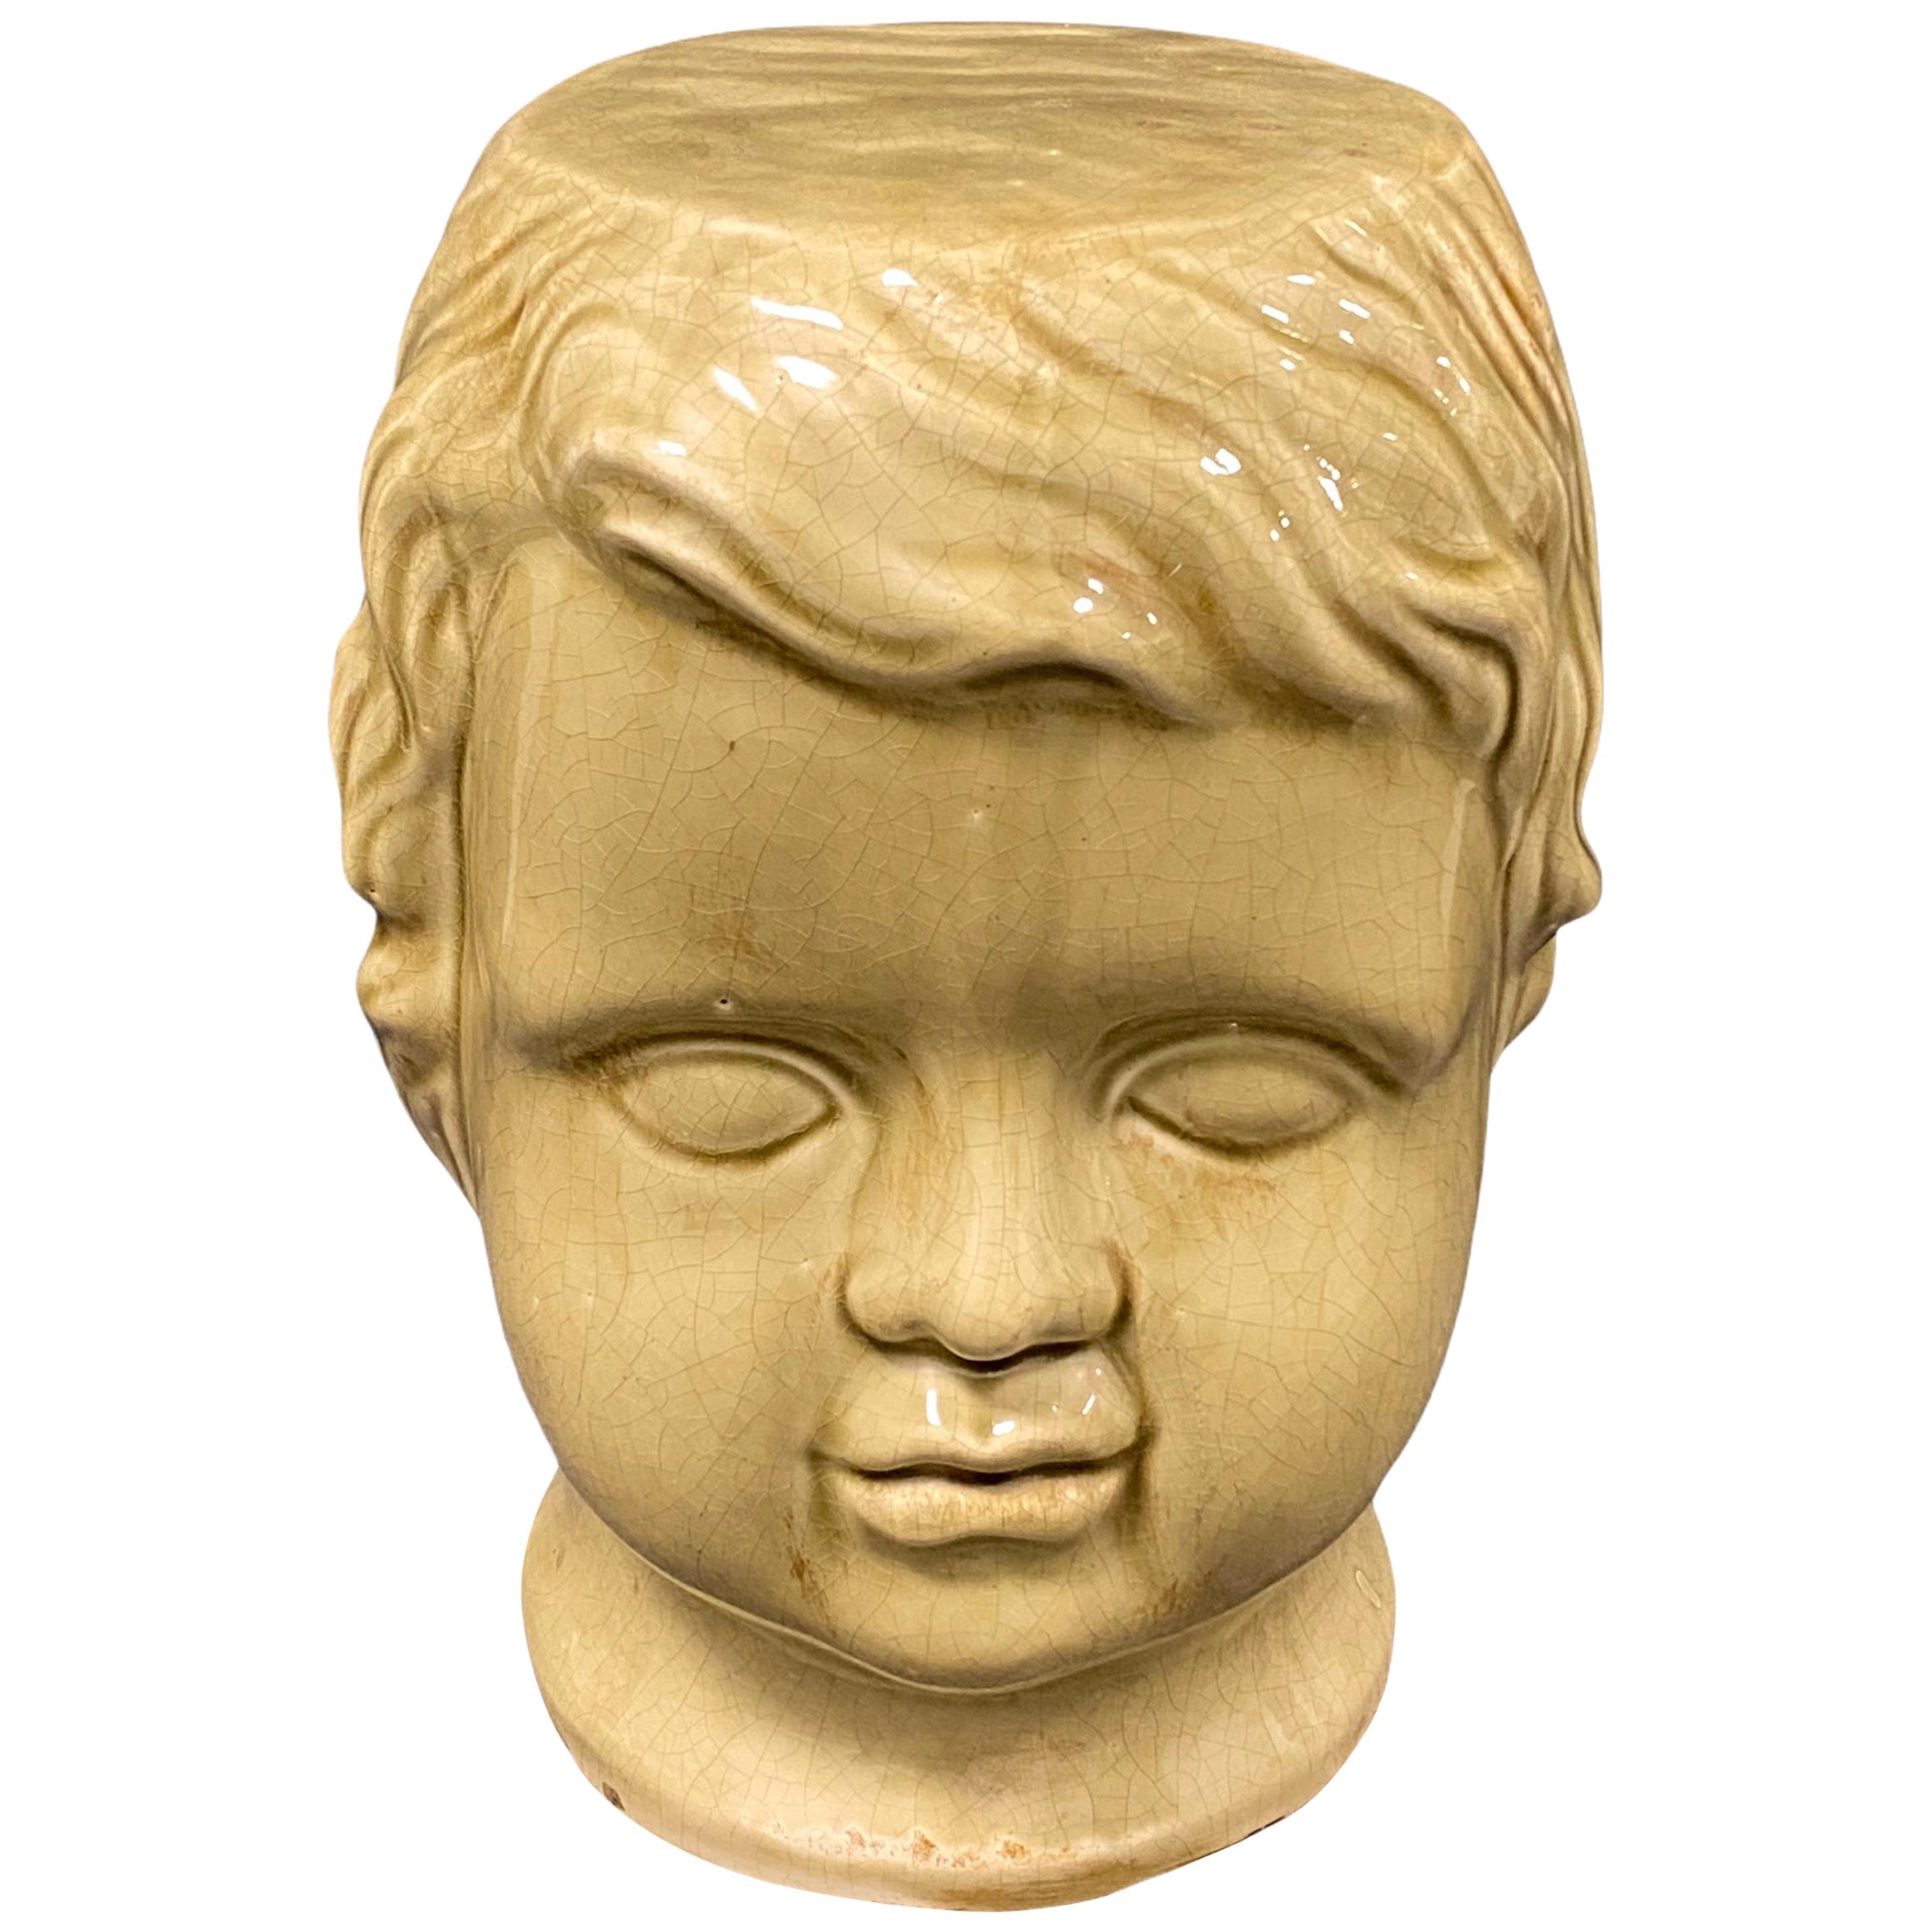 Beautiful Ceramic Toddler Head Garden Stool or Side Table Patio Decoration